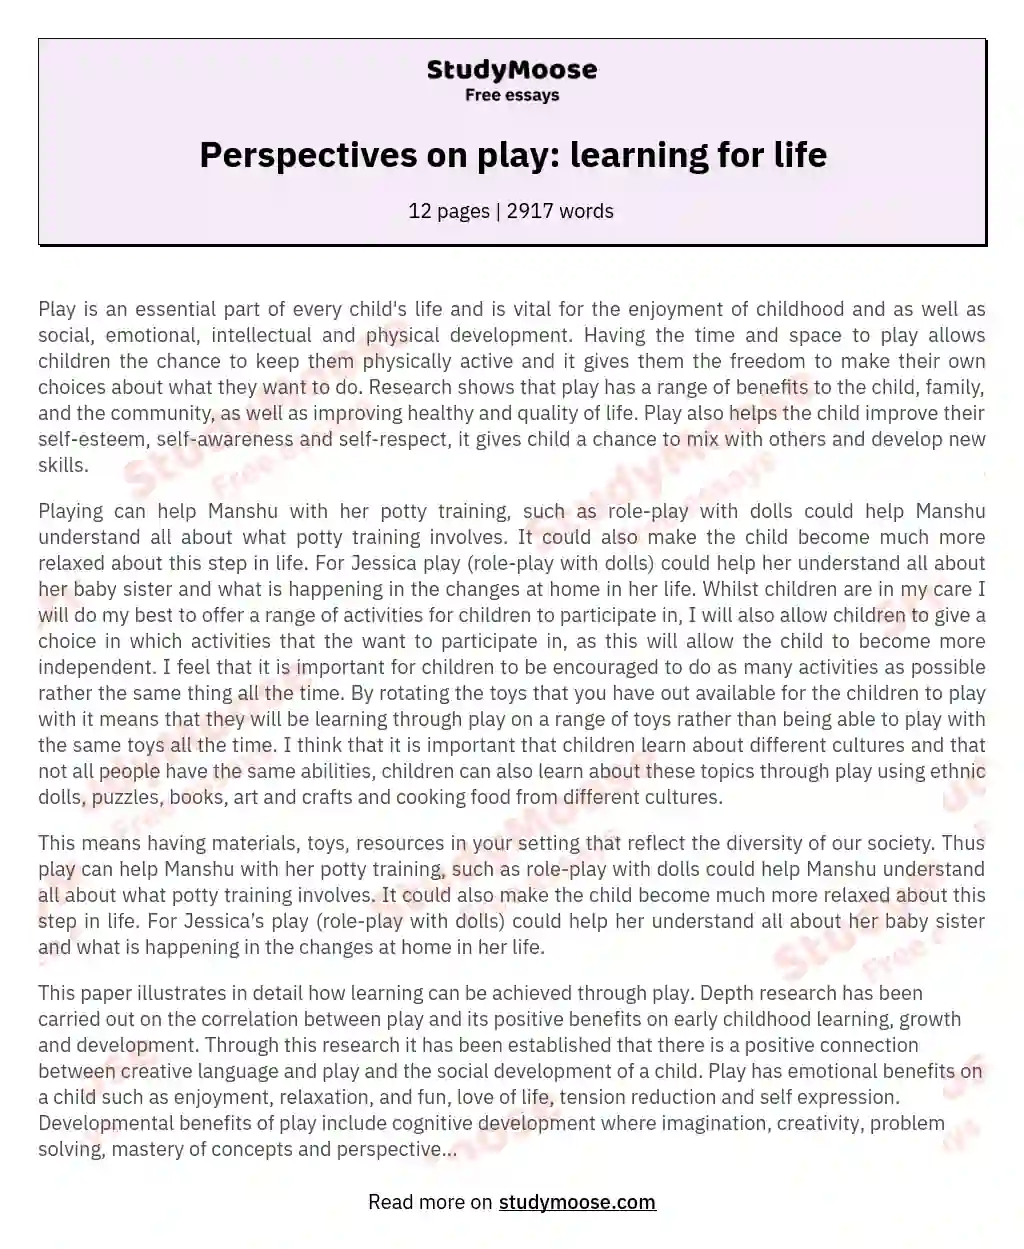 Perspectives on play: learning for life essay